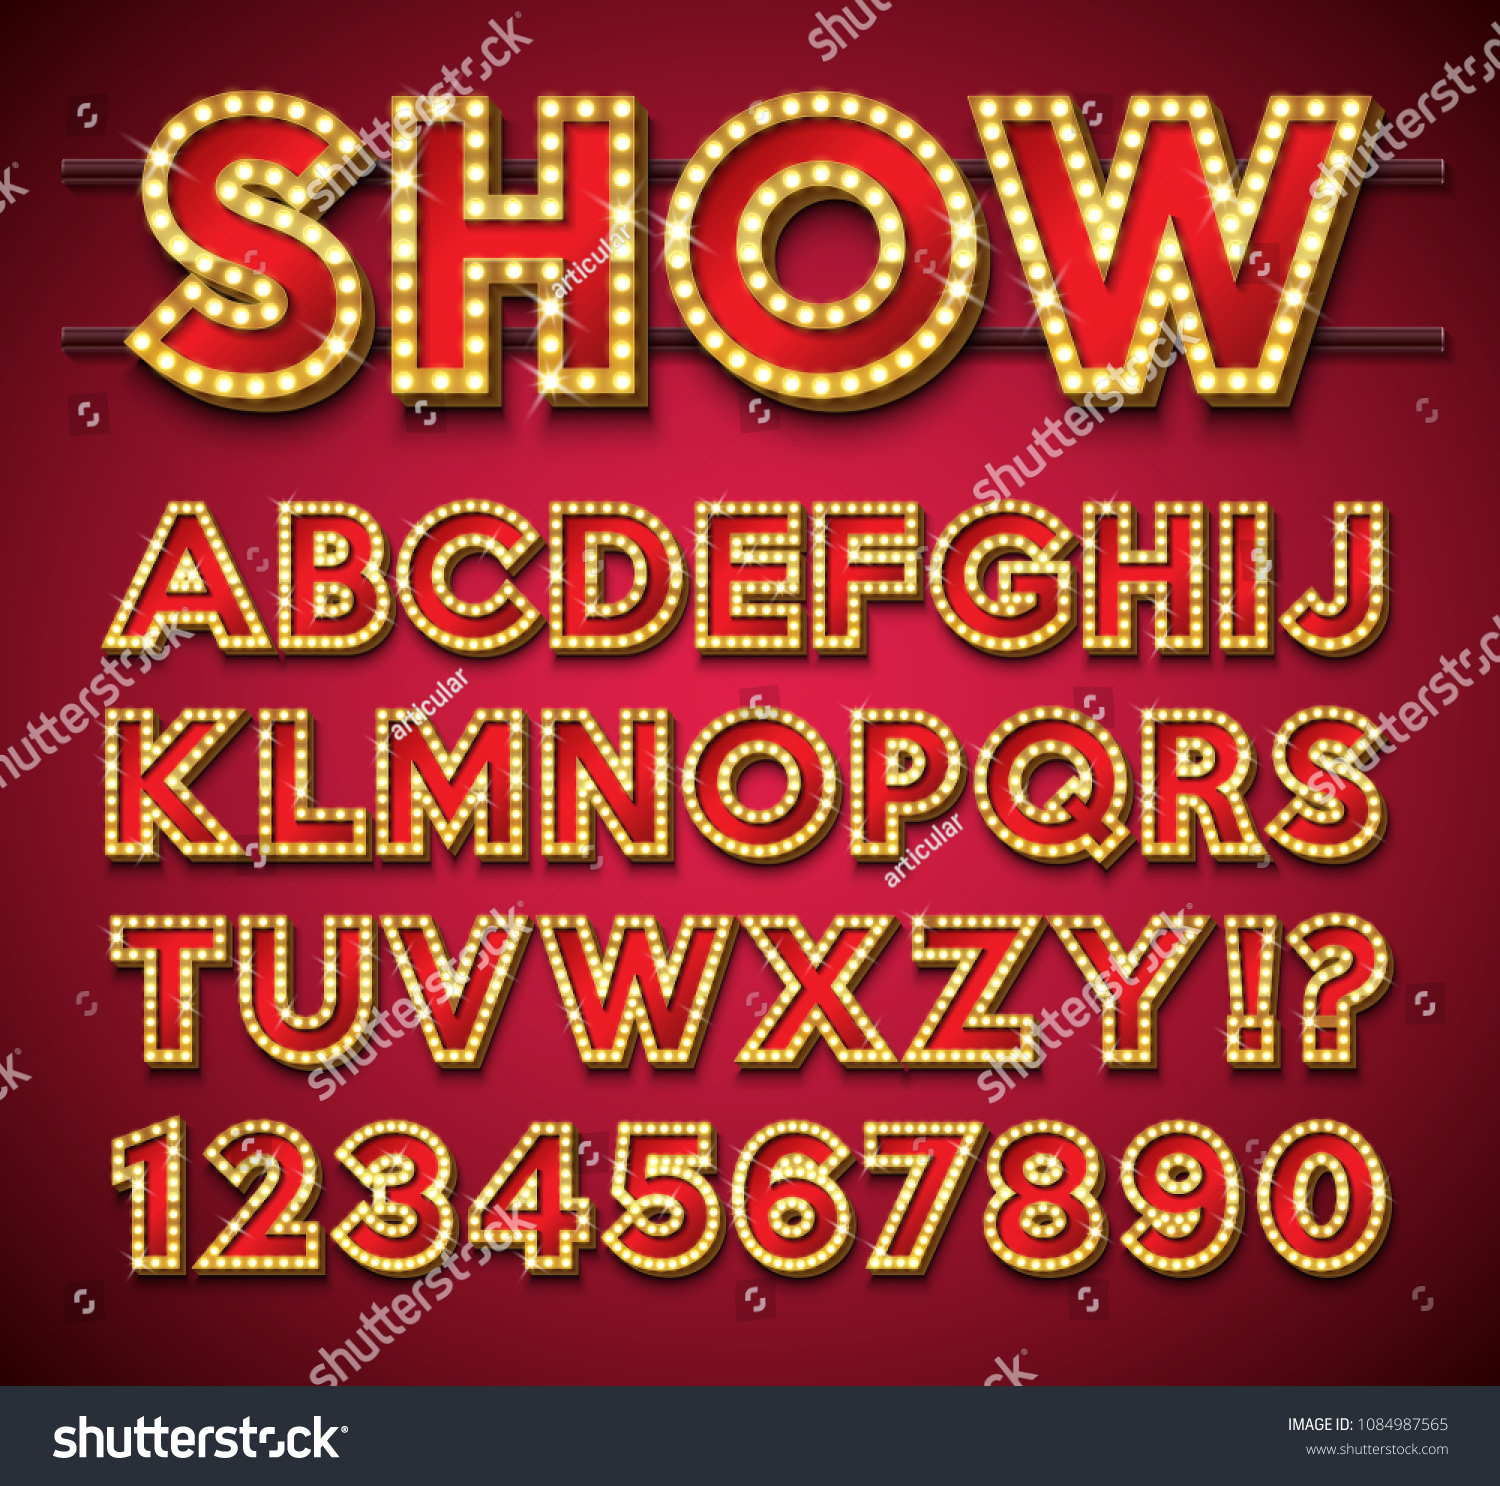 SVG of Light Bulb Alphabet with gold frame and shadow on red backgrond. Glowing retro vector font collection with shiny bright lights. ABC and number design for casino, night club or cinema. Layered svg